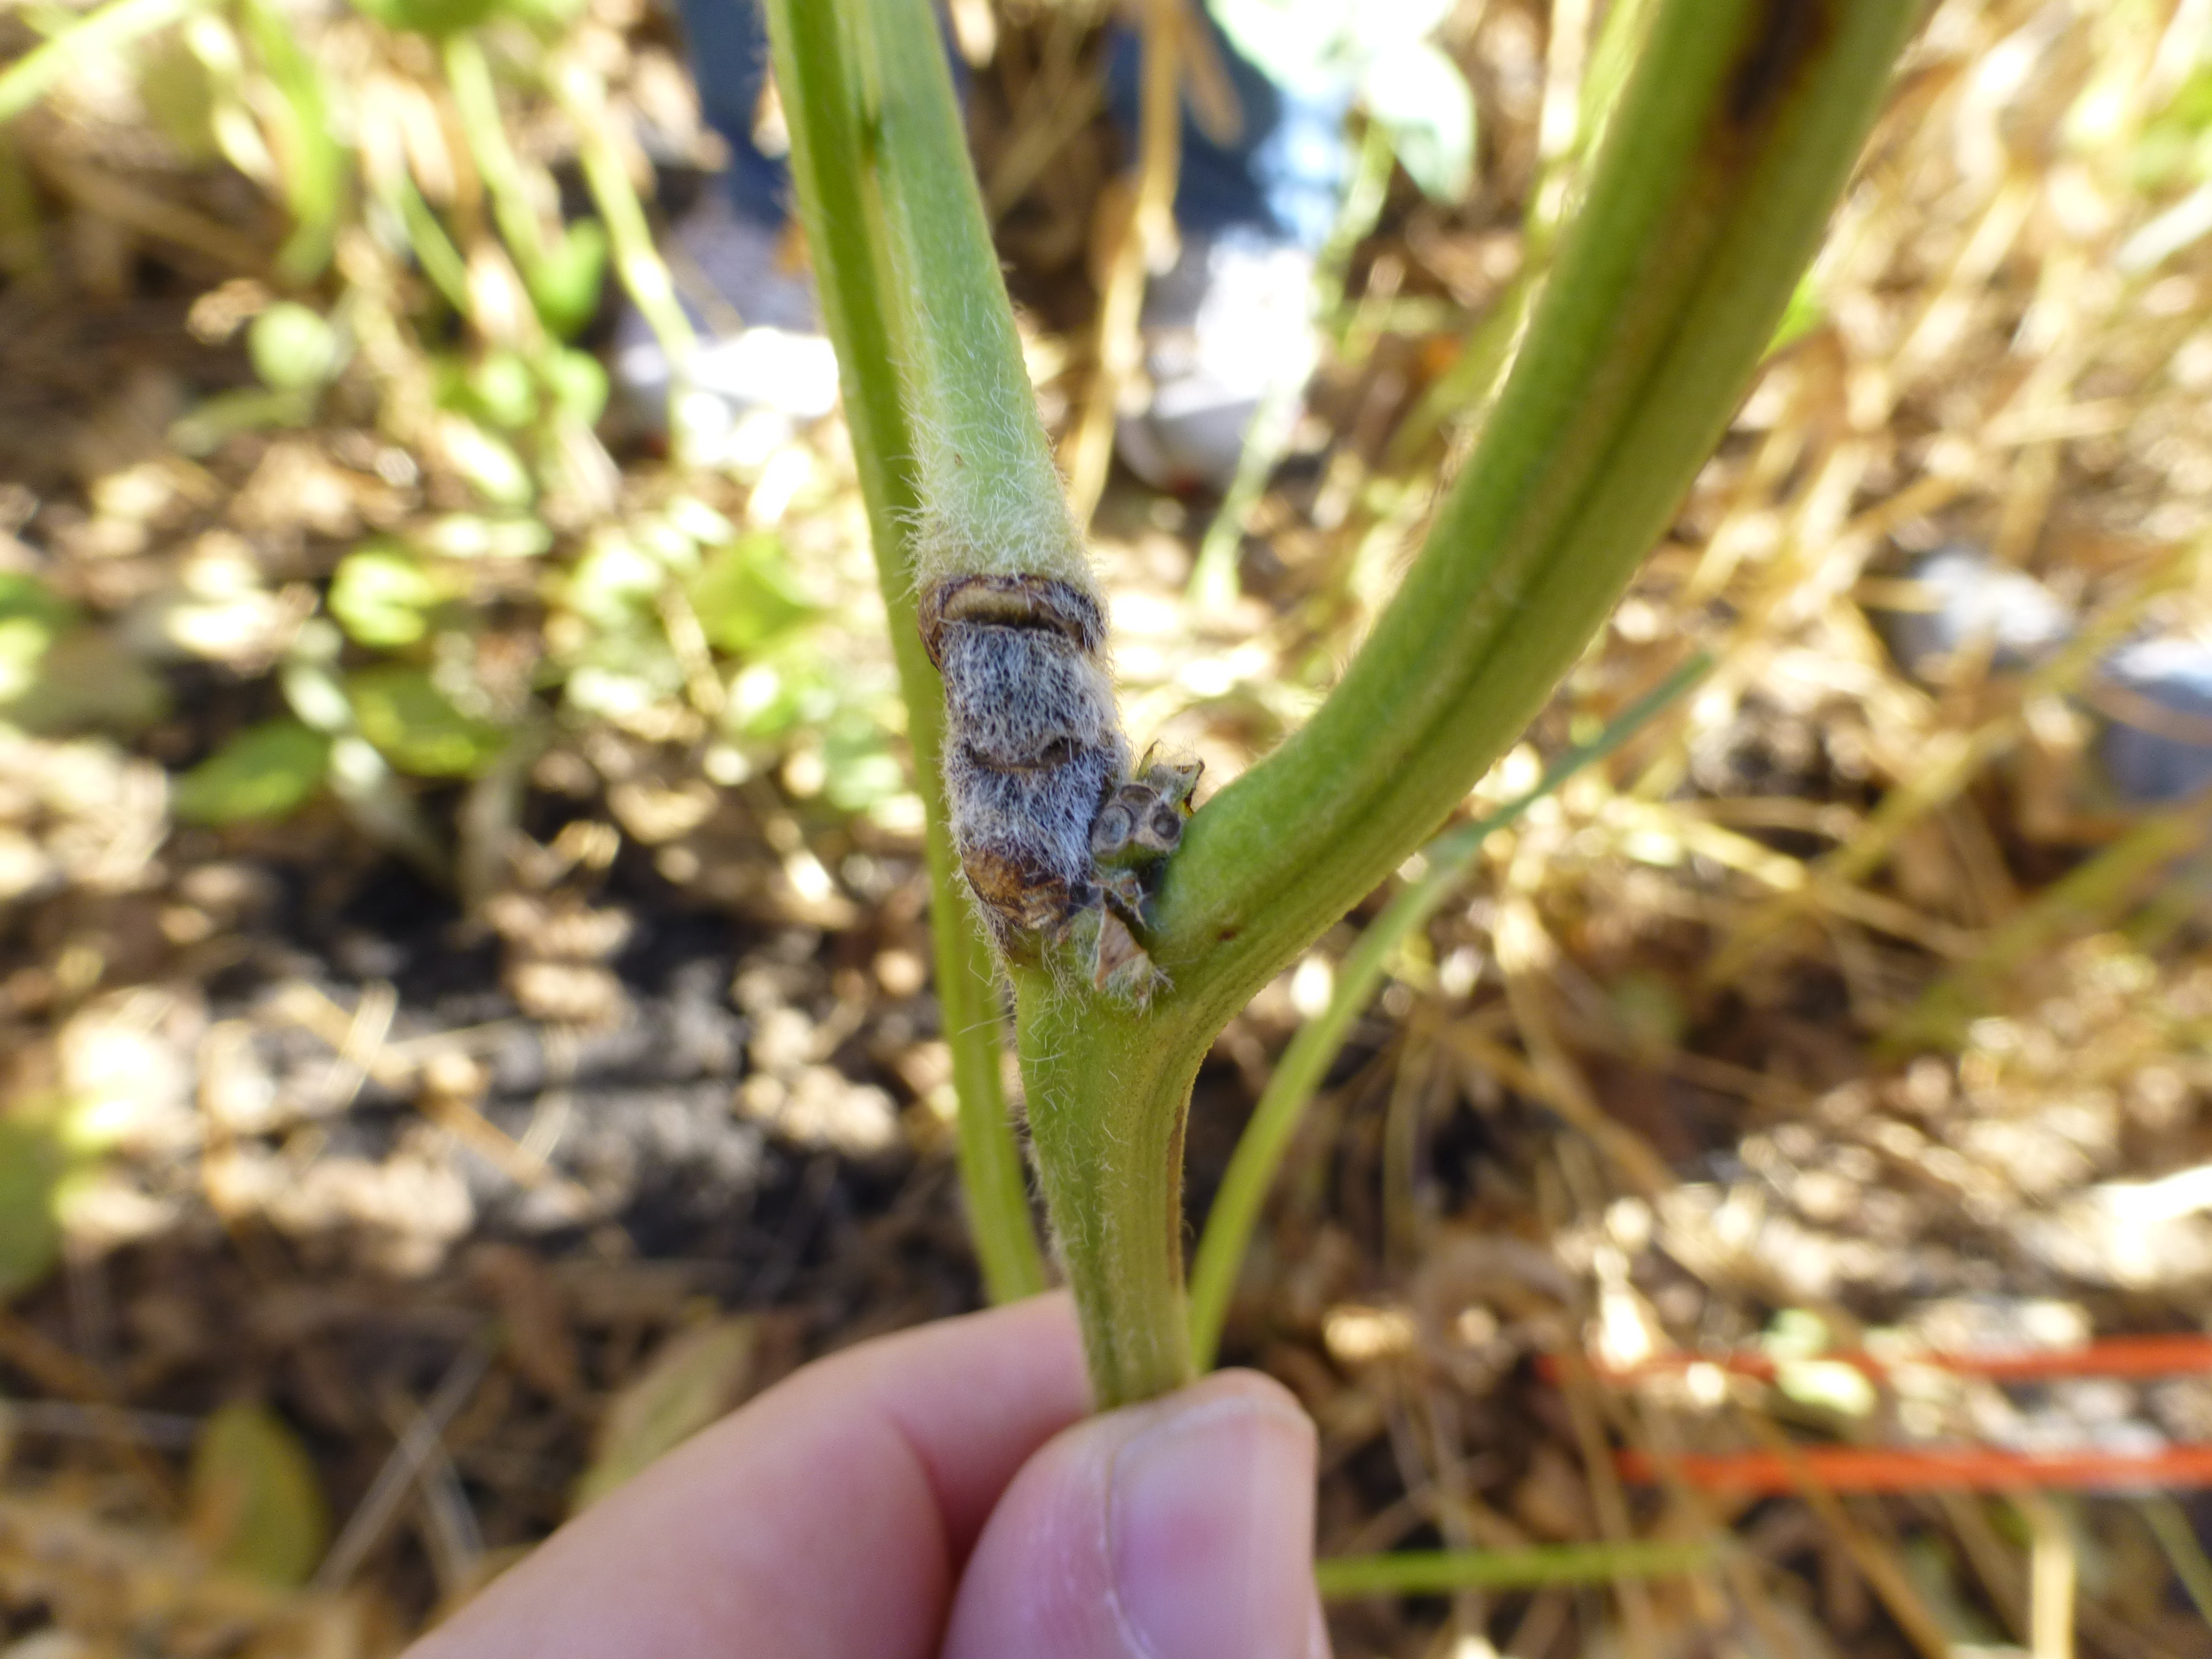 Tobacco streak virus can cause discoloration and dead streaks at nodes.